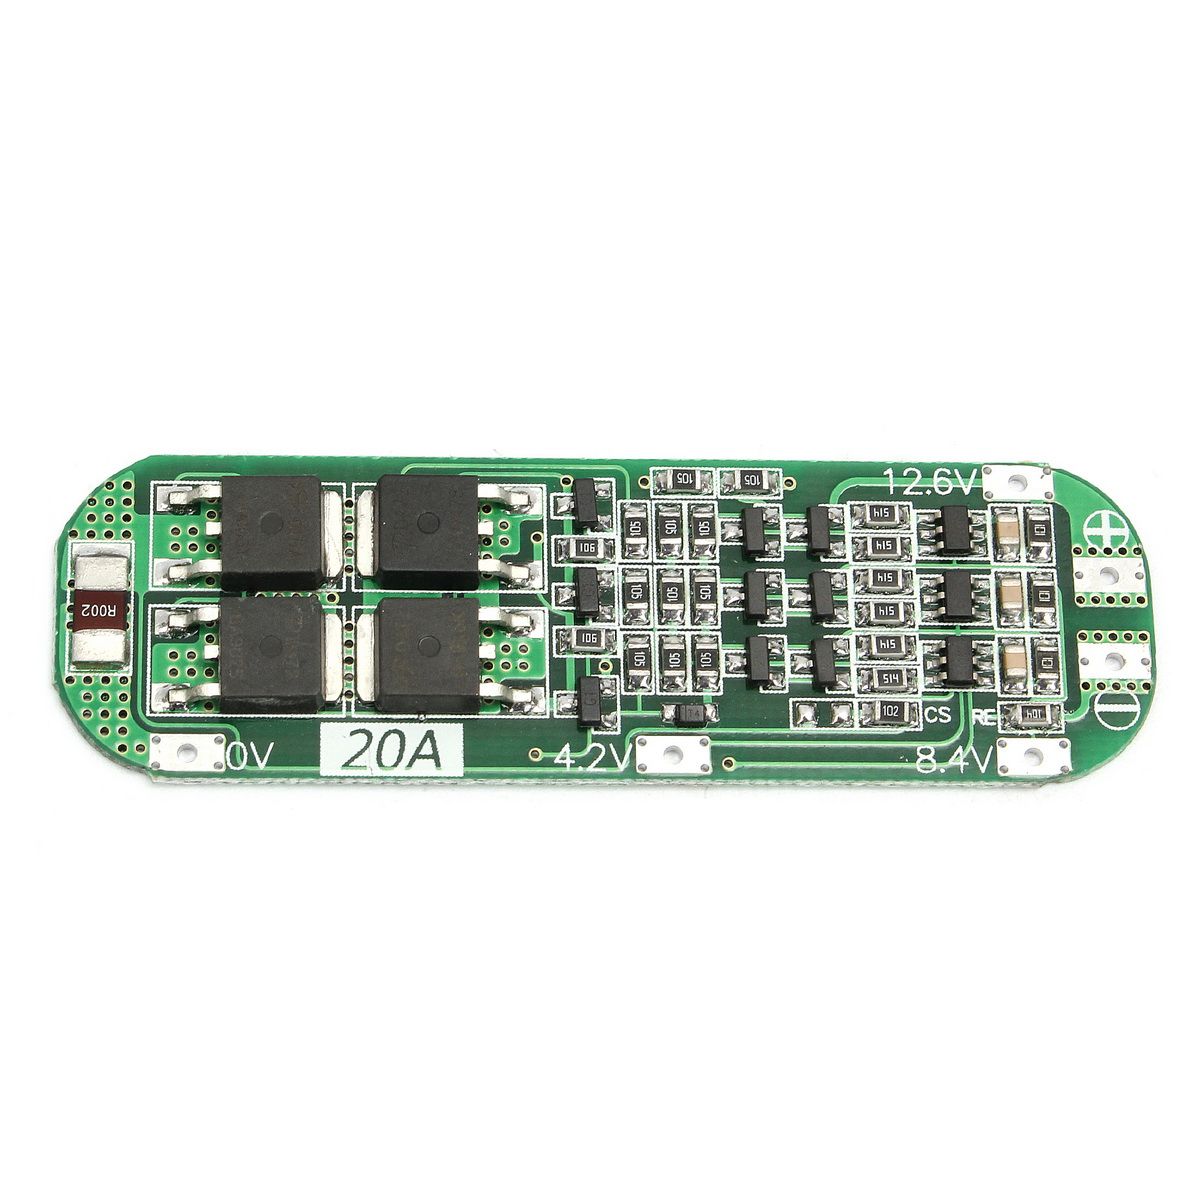 5pcs-3S-20A-Li-ion-Lithium-Battery-18650-Charger-PCB-BMS-Protection-Board-126V-Cell-1120988